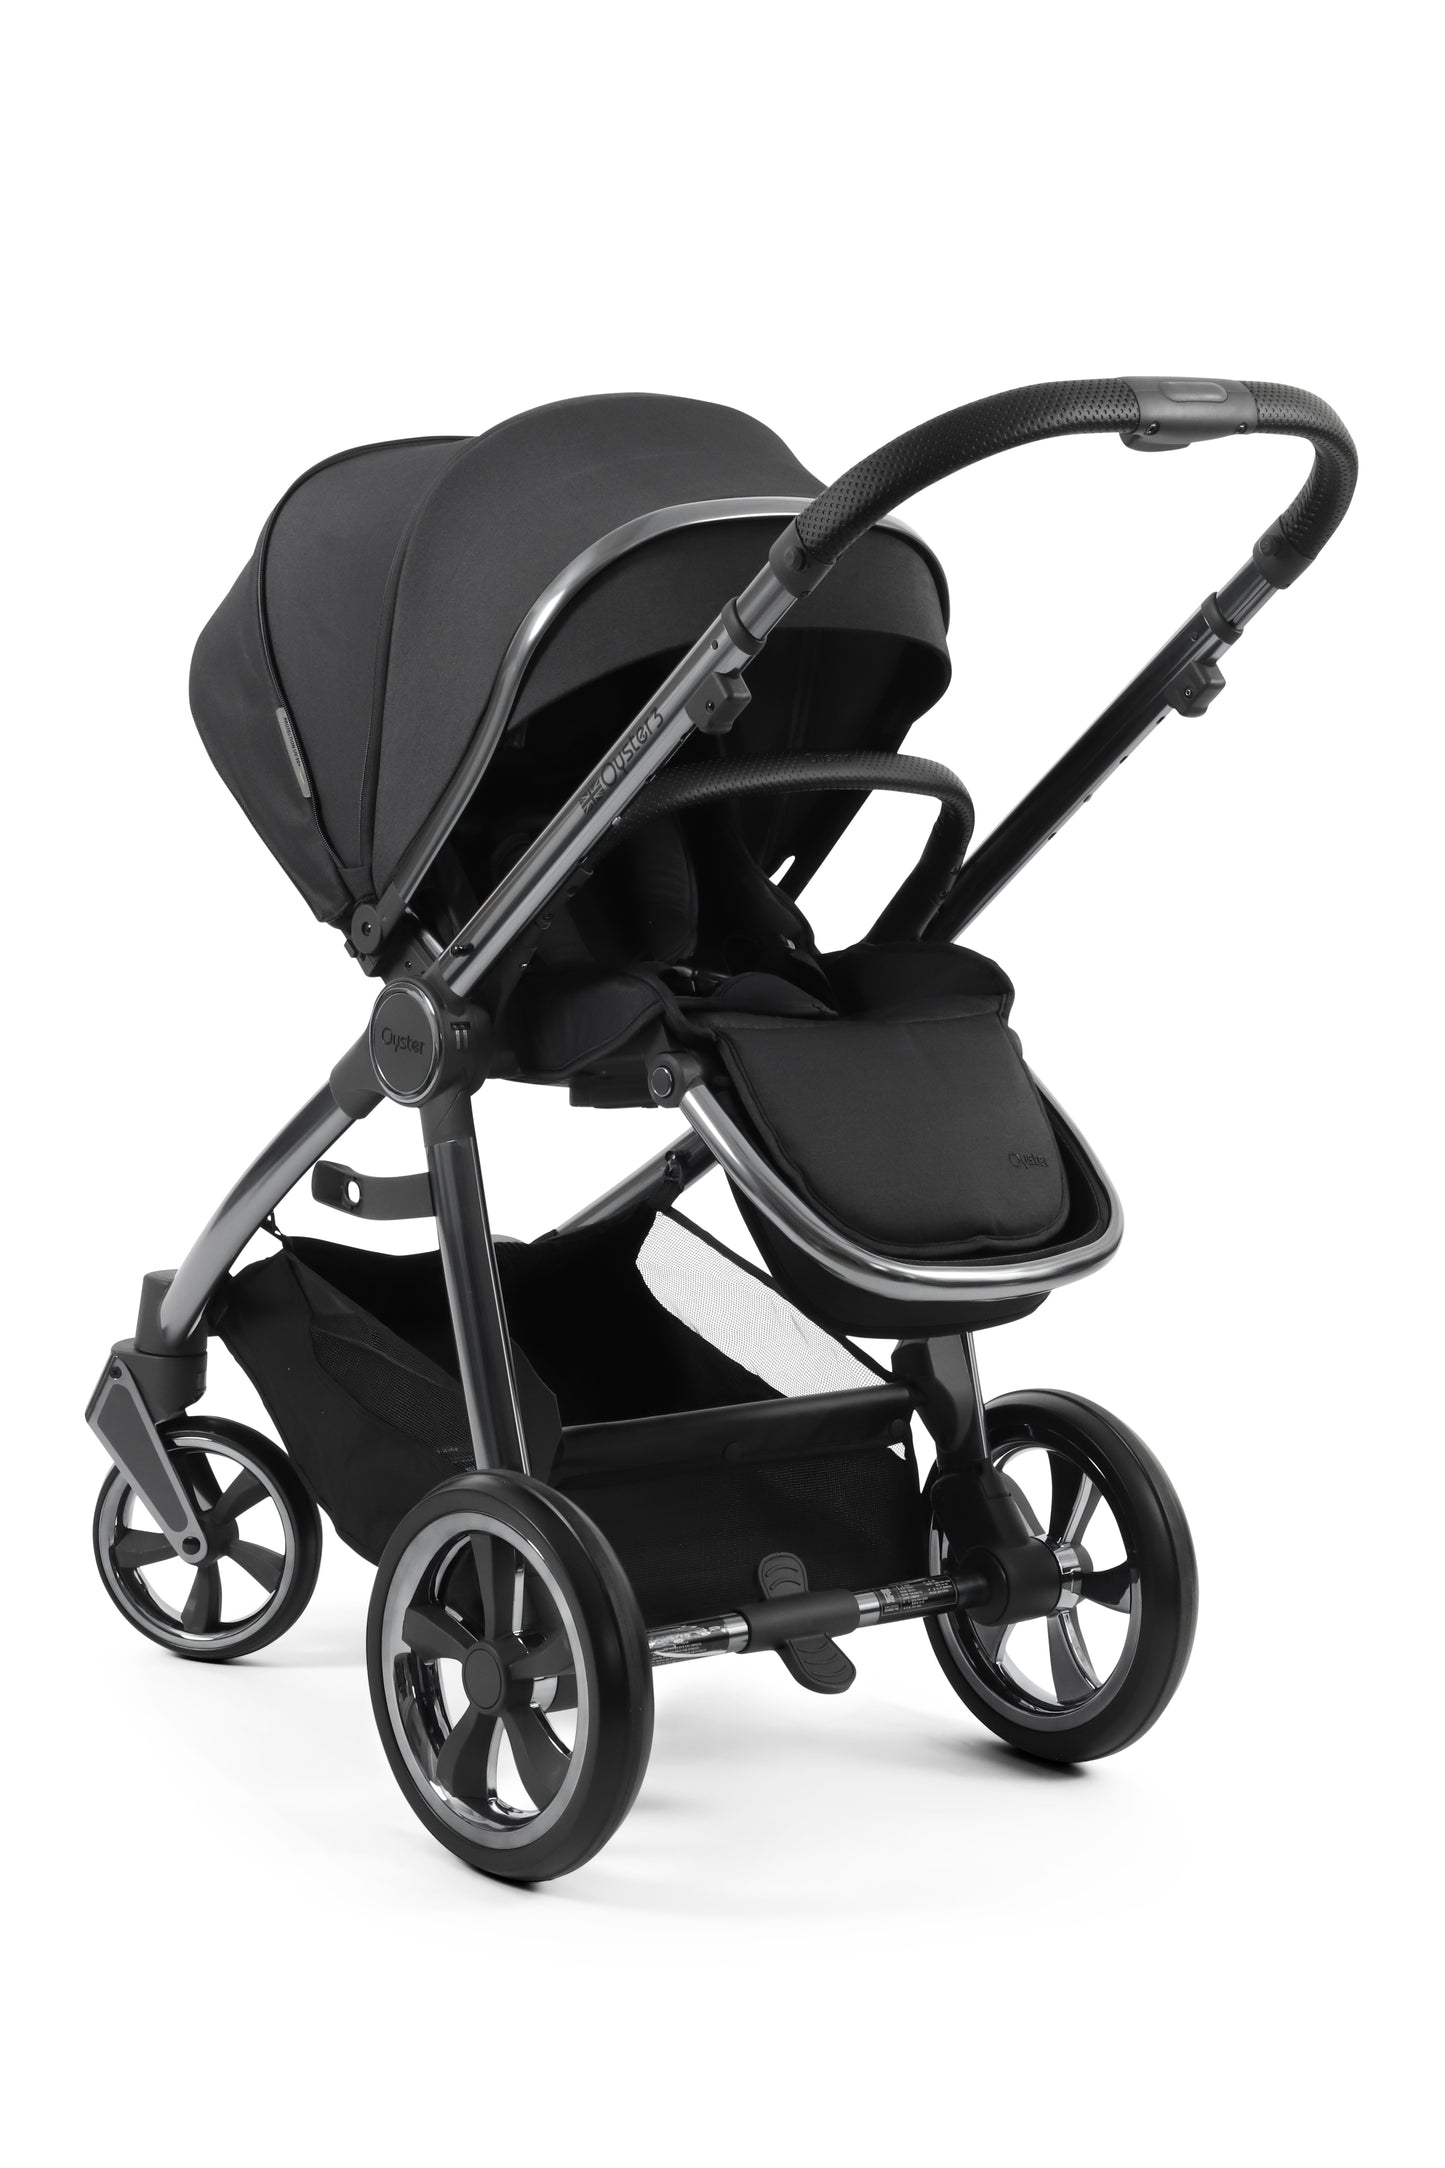 Oyster 3 Pushchair | Carbonite (Gun Metal Chassis)